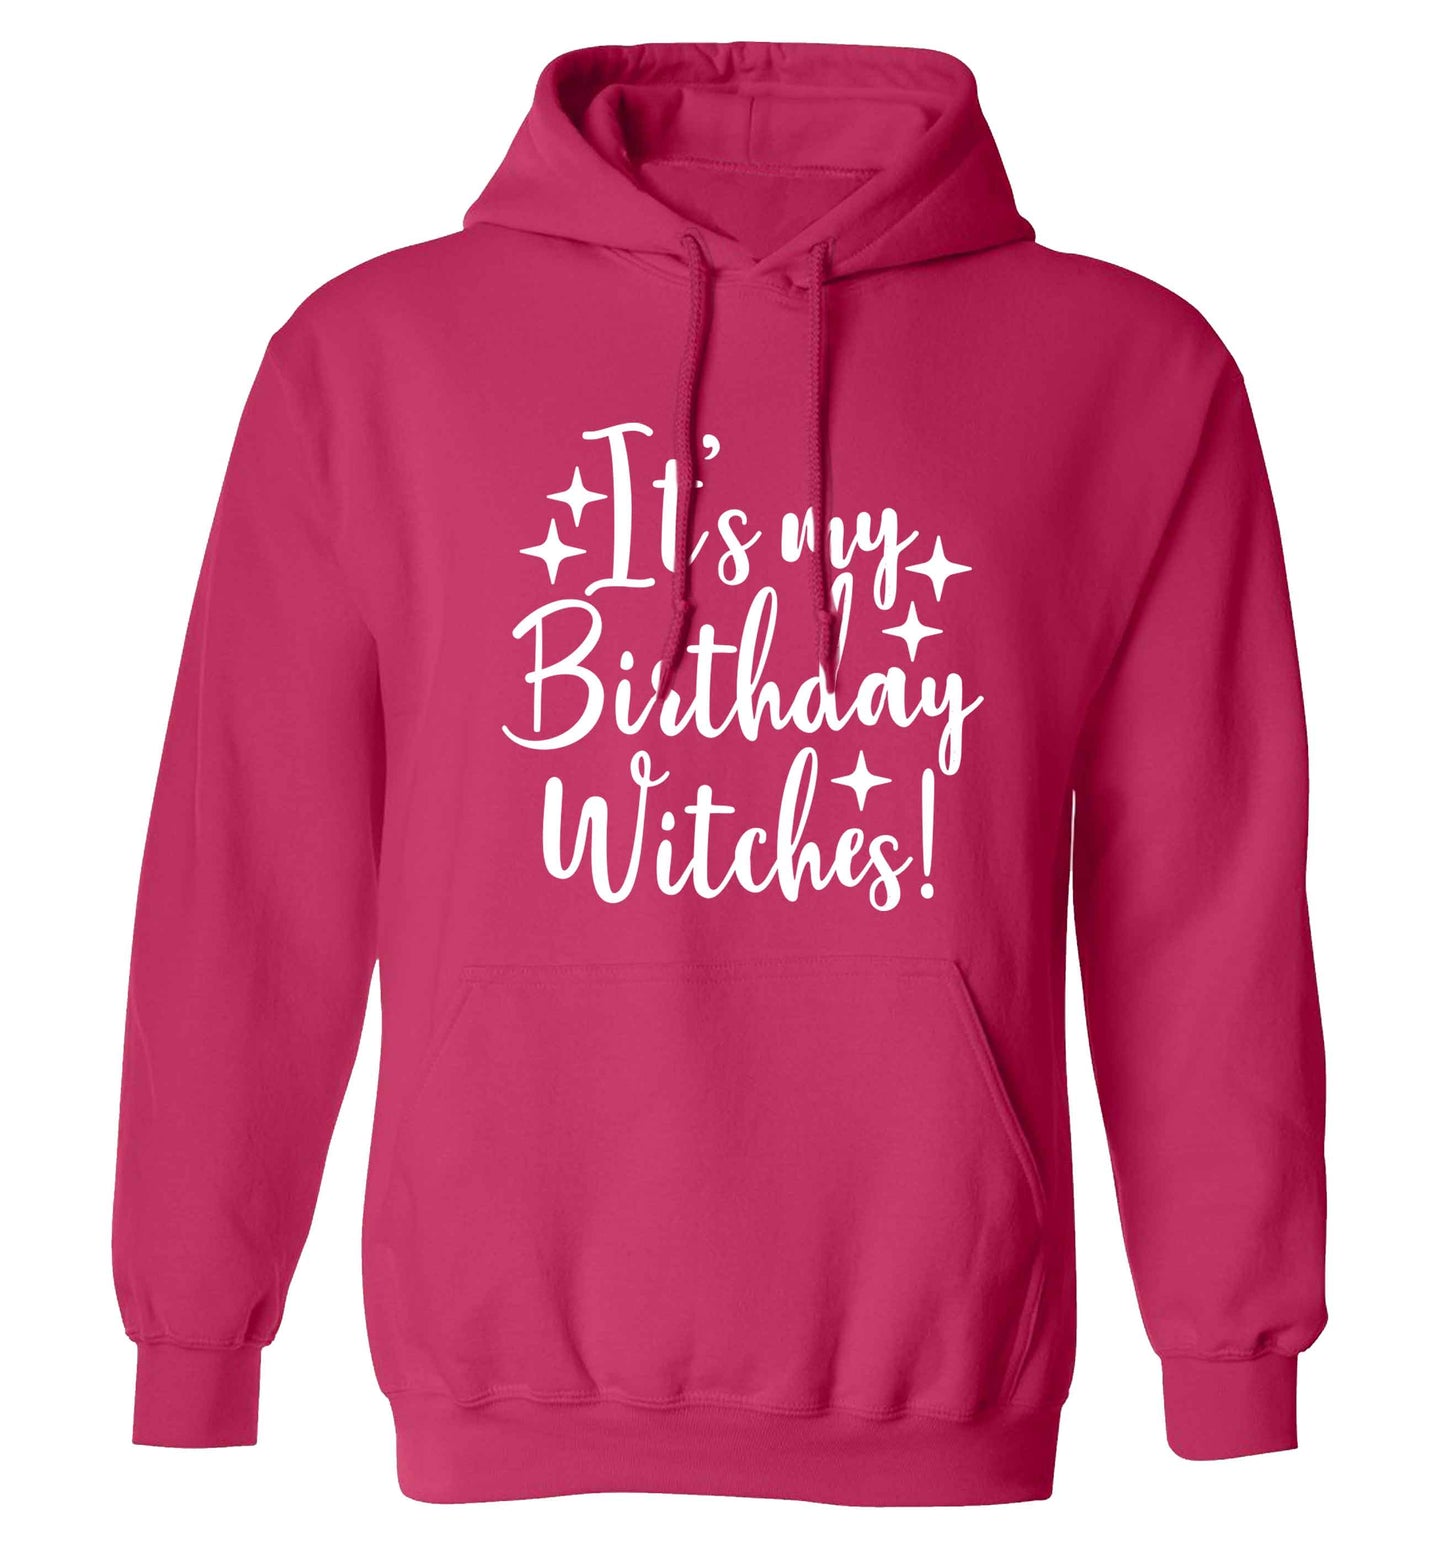 It's my birthday witches!adults unisex pink hoodie 2XL